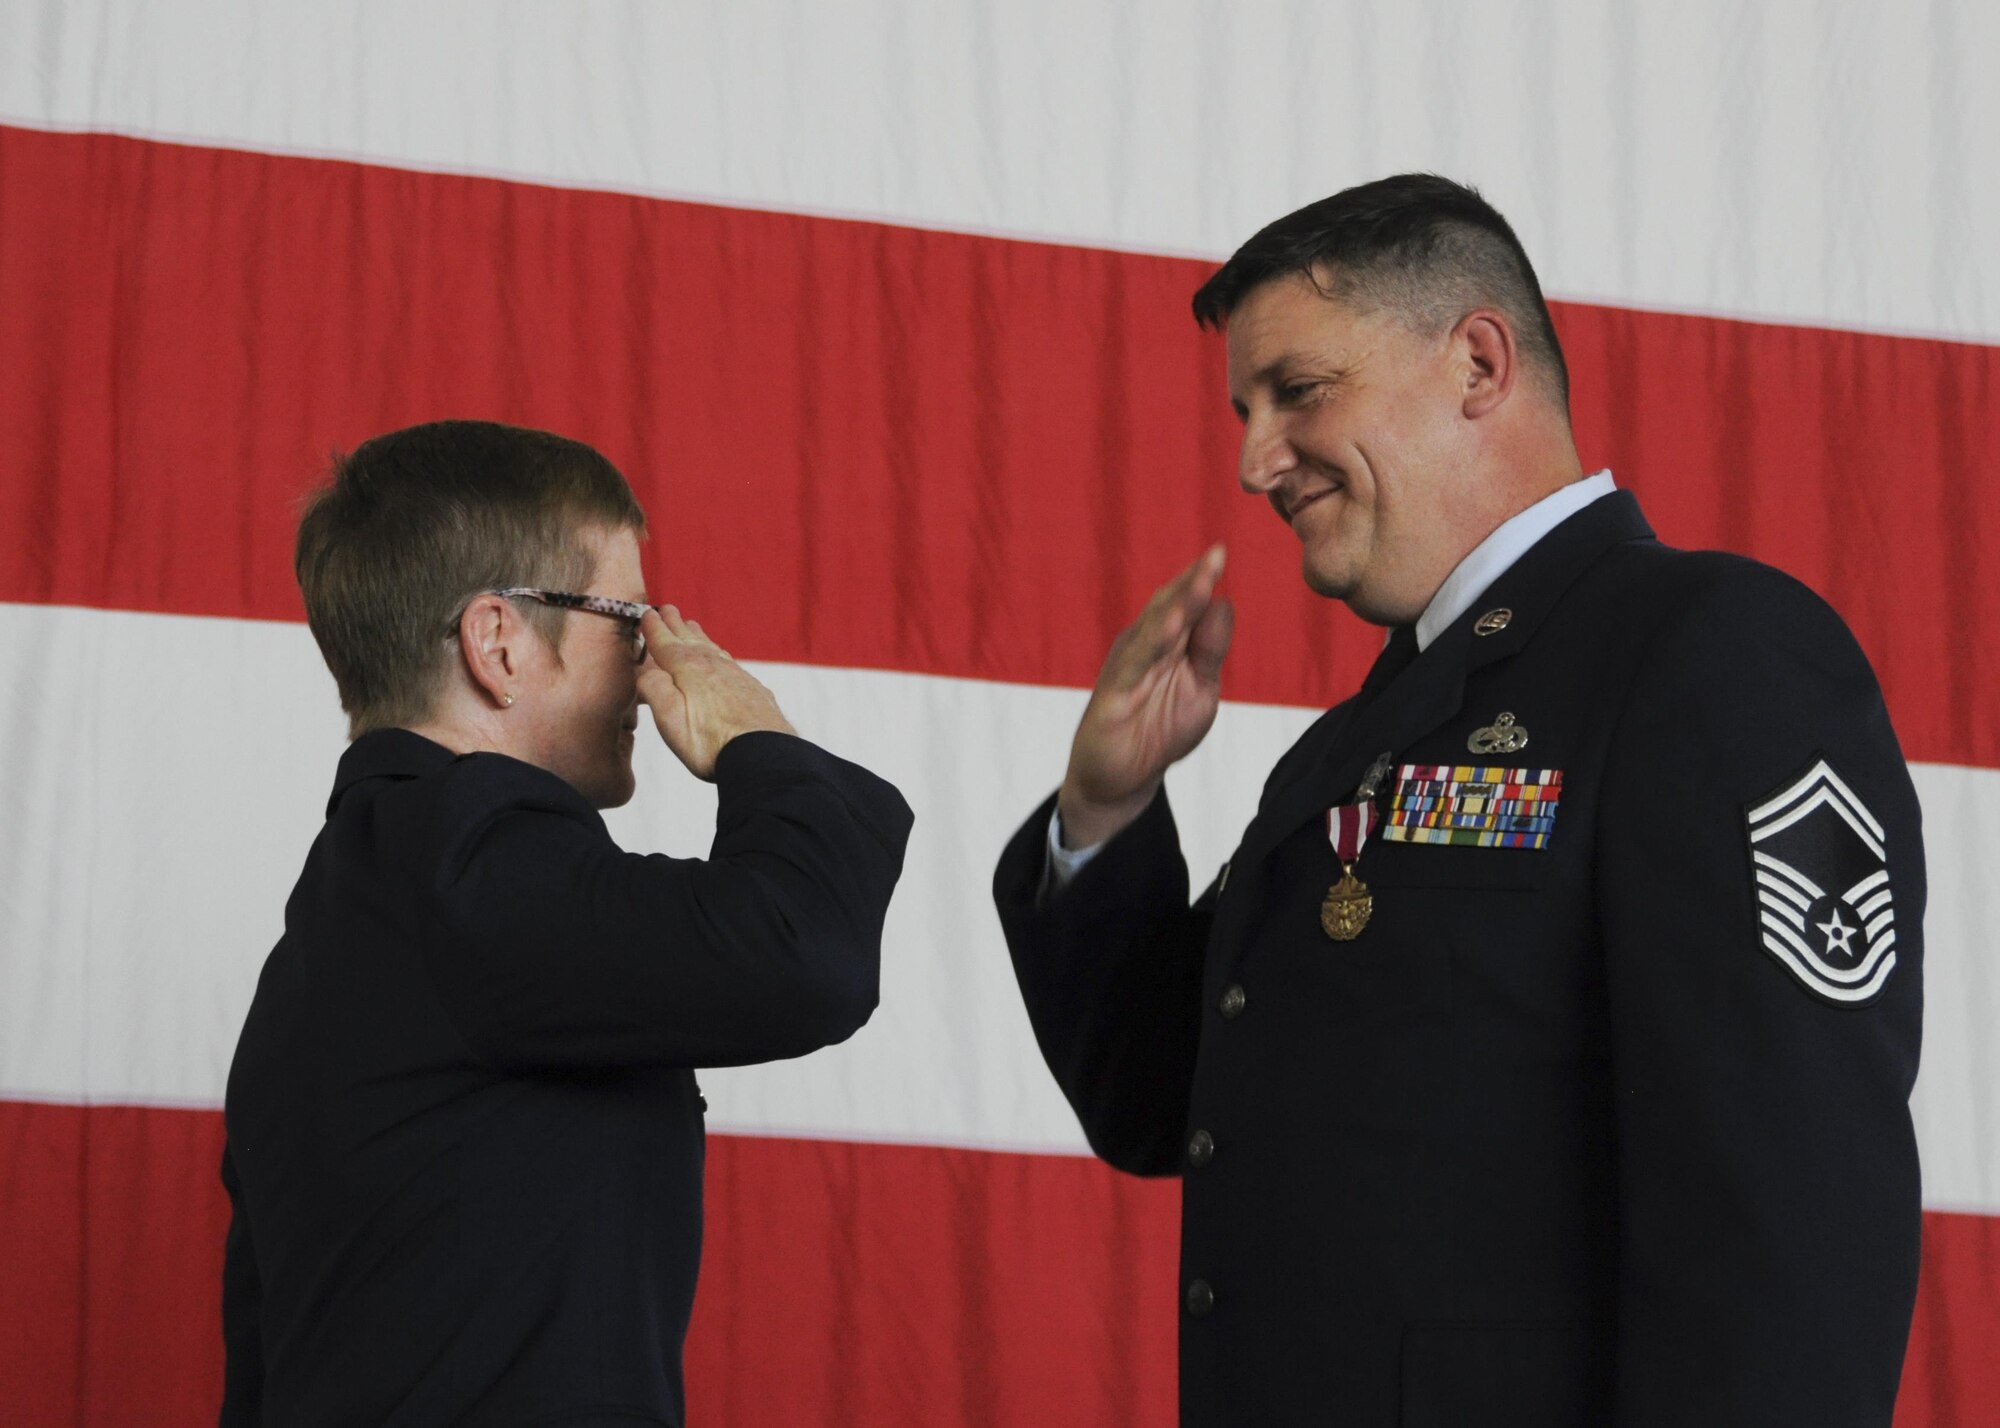 Senior Master Sgt. Anthony Axton, 442nd Aircraft Maintenance accessory flight chief, salutes Col. Anne Yelderman, 10th Air Force Emergency Preparedness Liaison Officer, after he was presented the Meritorious Service Medal during his retirement ceremony at Whiteman Air Force Base, Mo., Oct. 16, 2016. Axton was born at Whiteman while his father was stationed here. (U.S. Air Force photo/Senior Airman Missy Sterling)